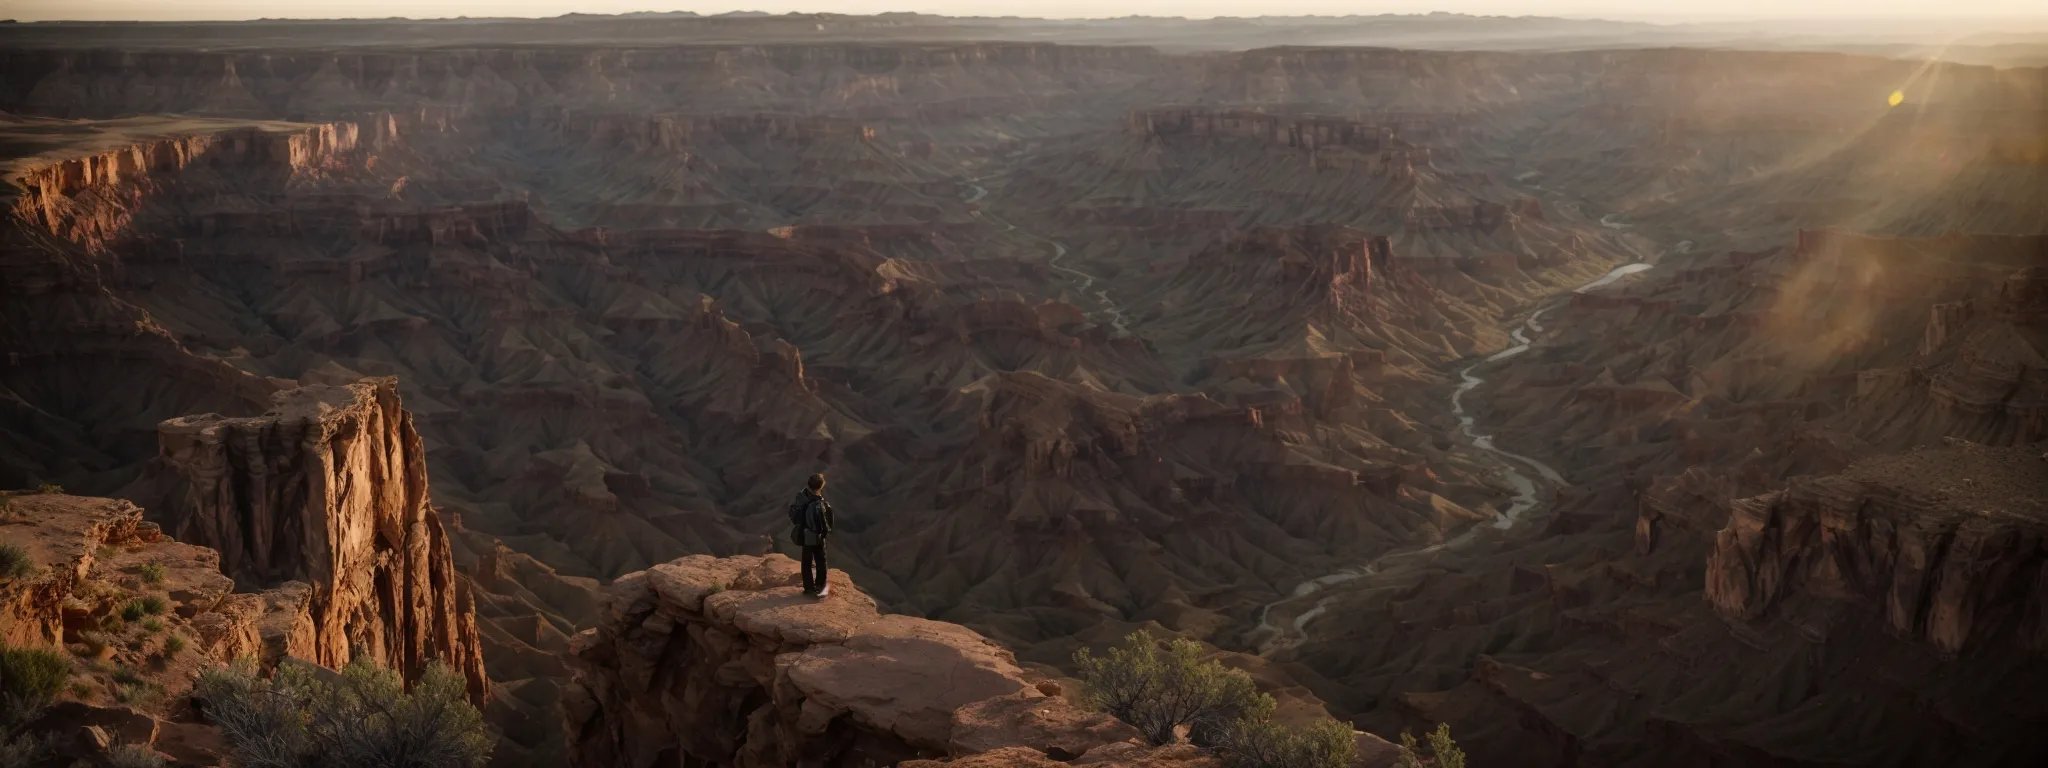 a traveler stands at a scenic overlook, gazing out over a vast canyon bathed in the golden light of the setting sun.